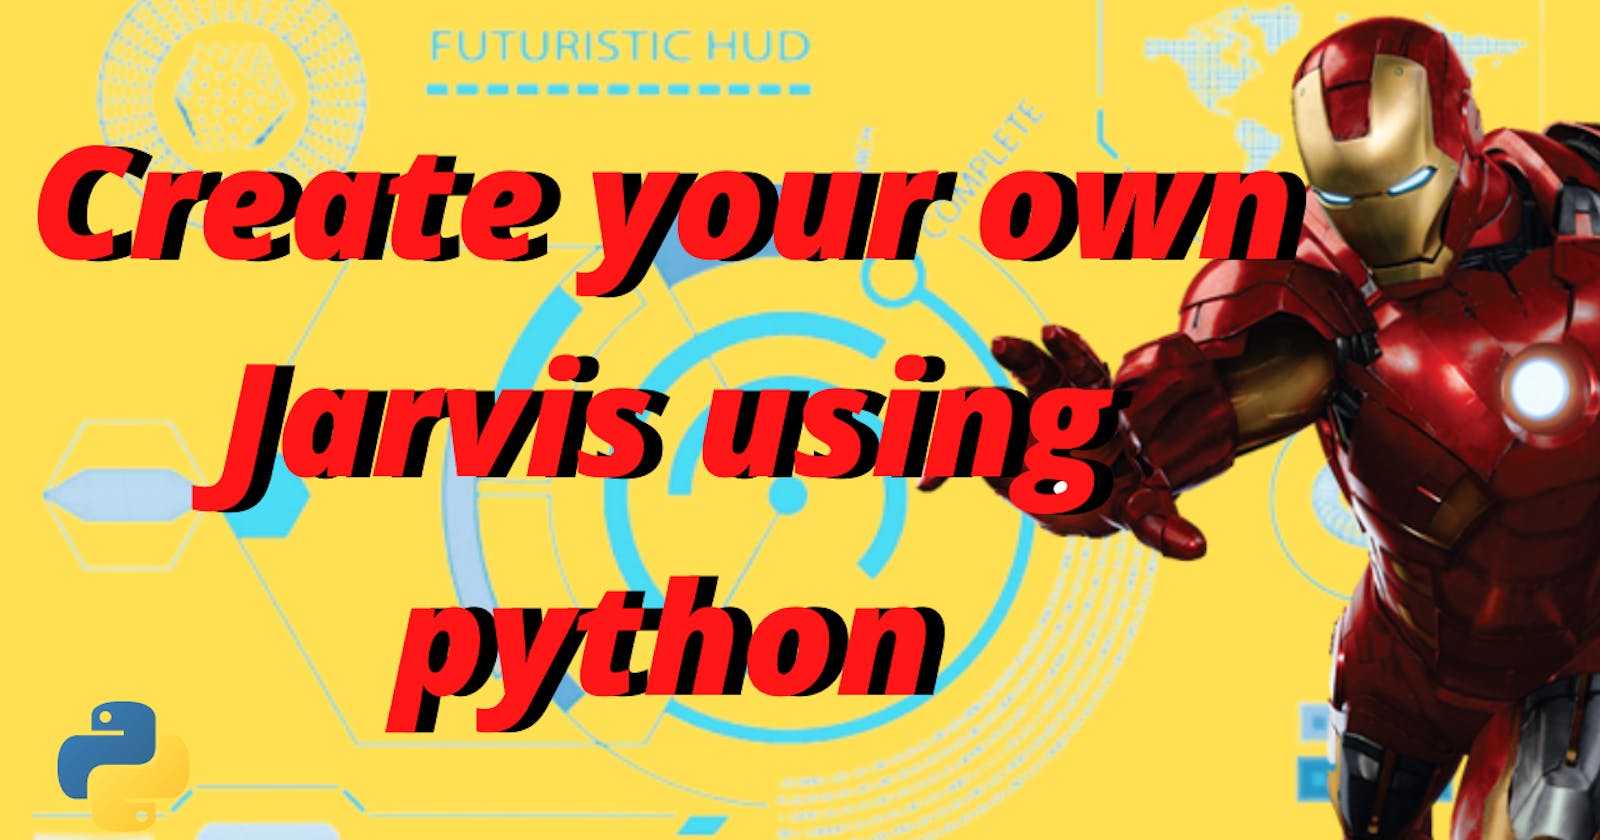 Create your own 🤖jarvis using python